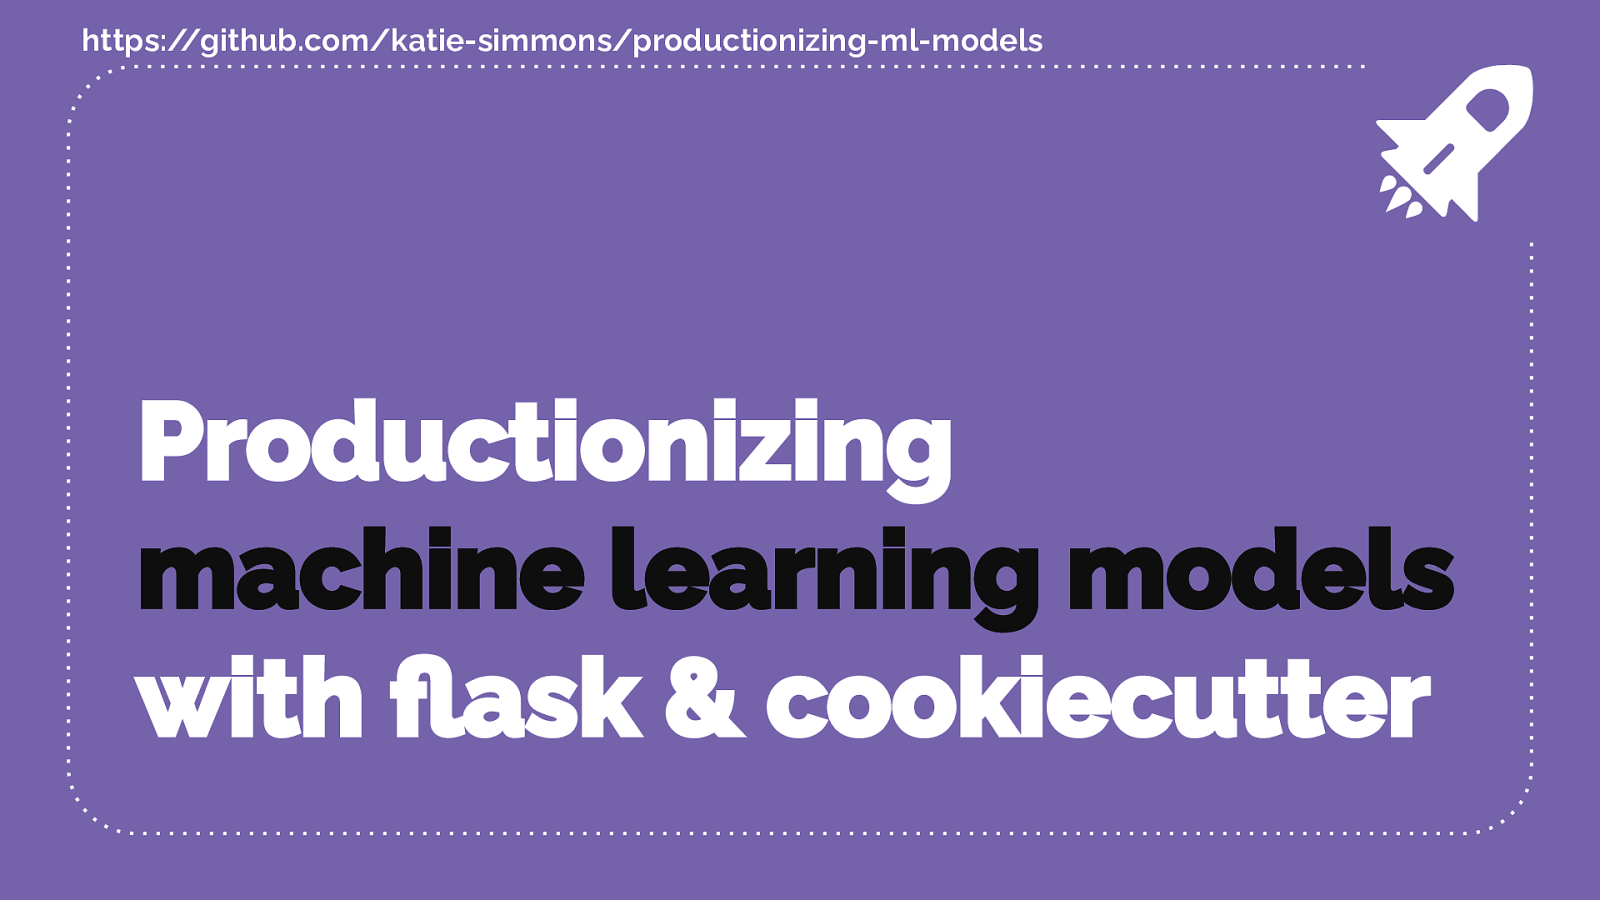 Productionizing ML Models with Cookiecutter